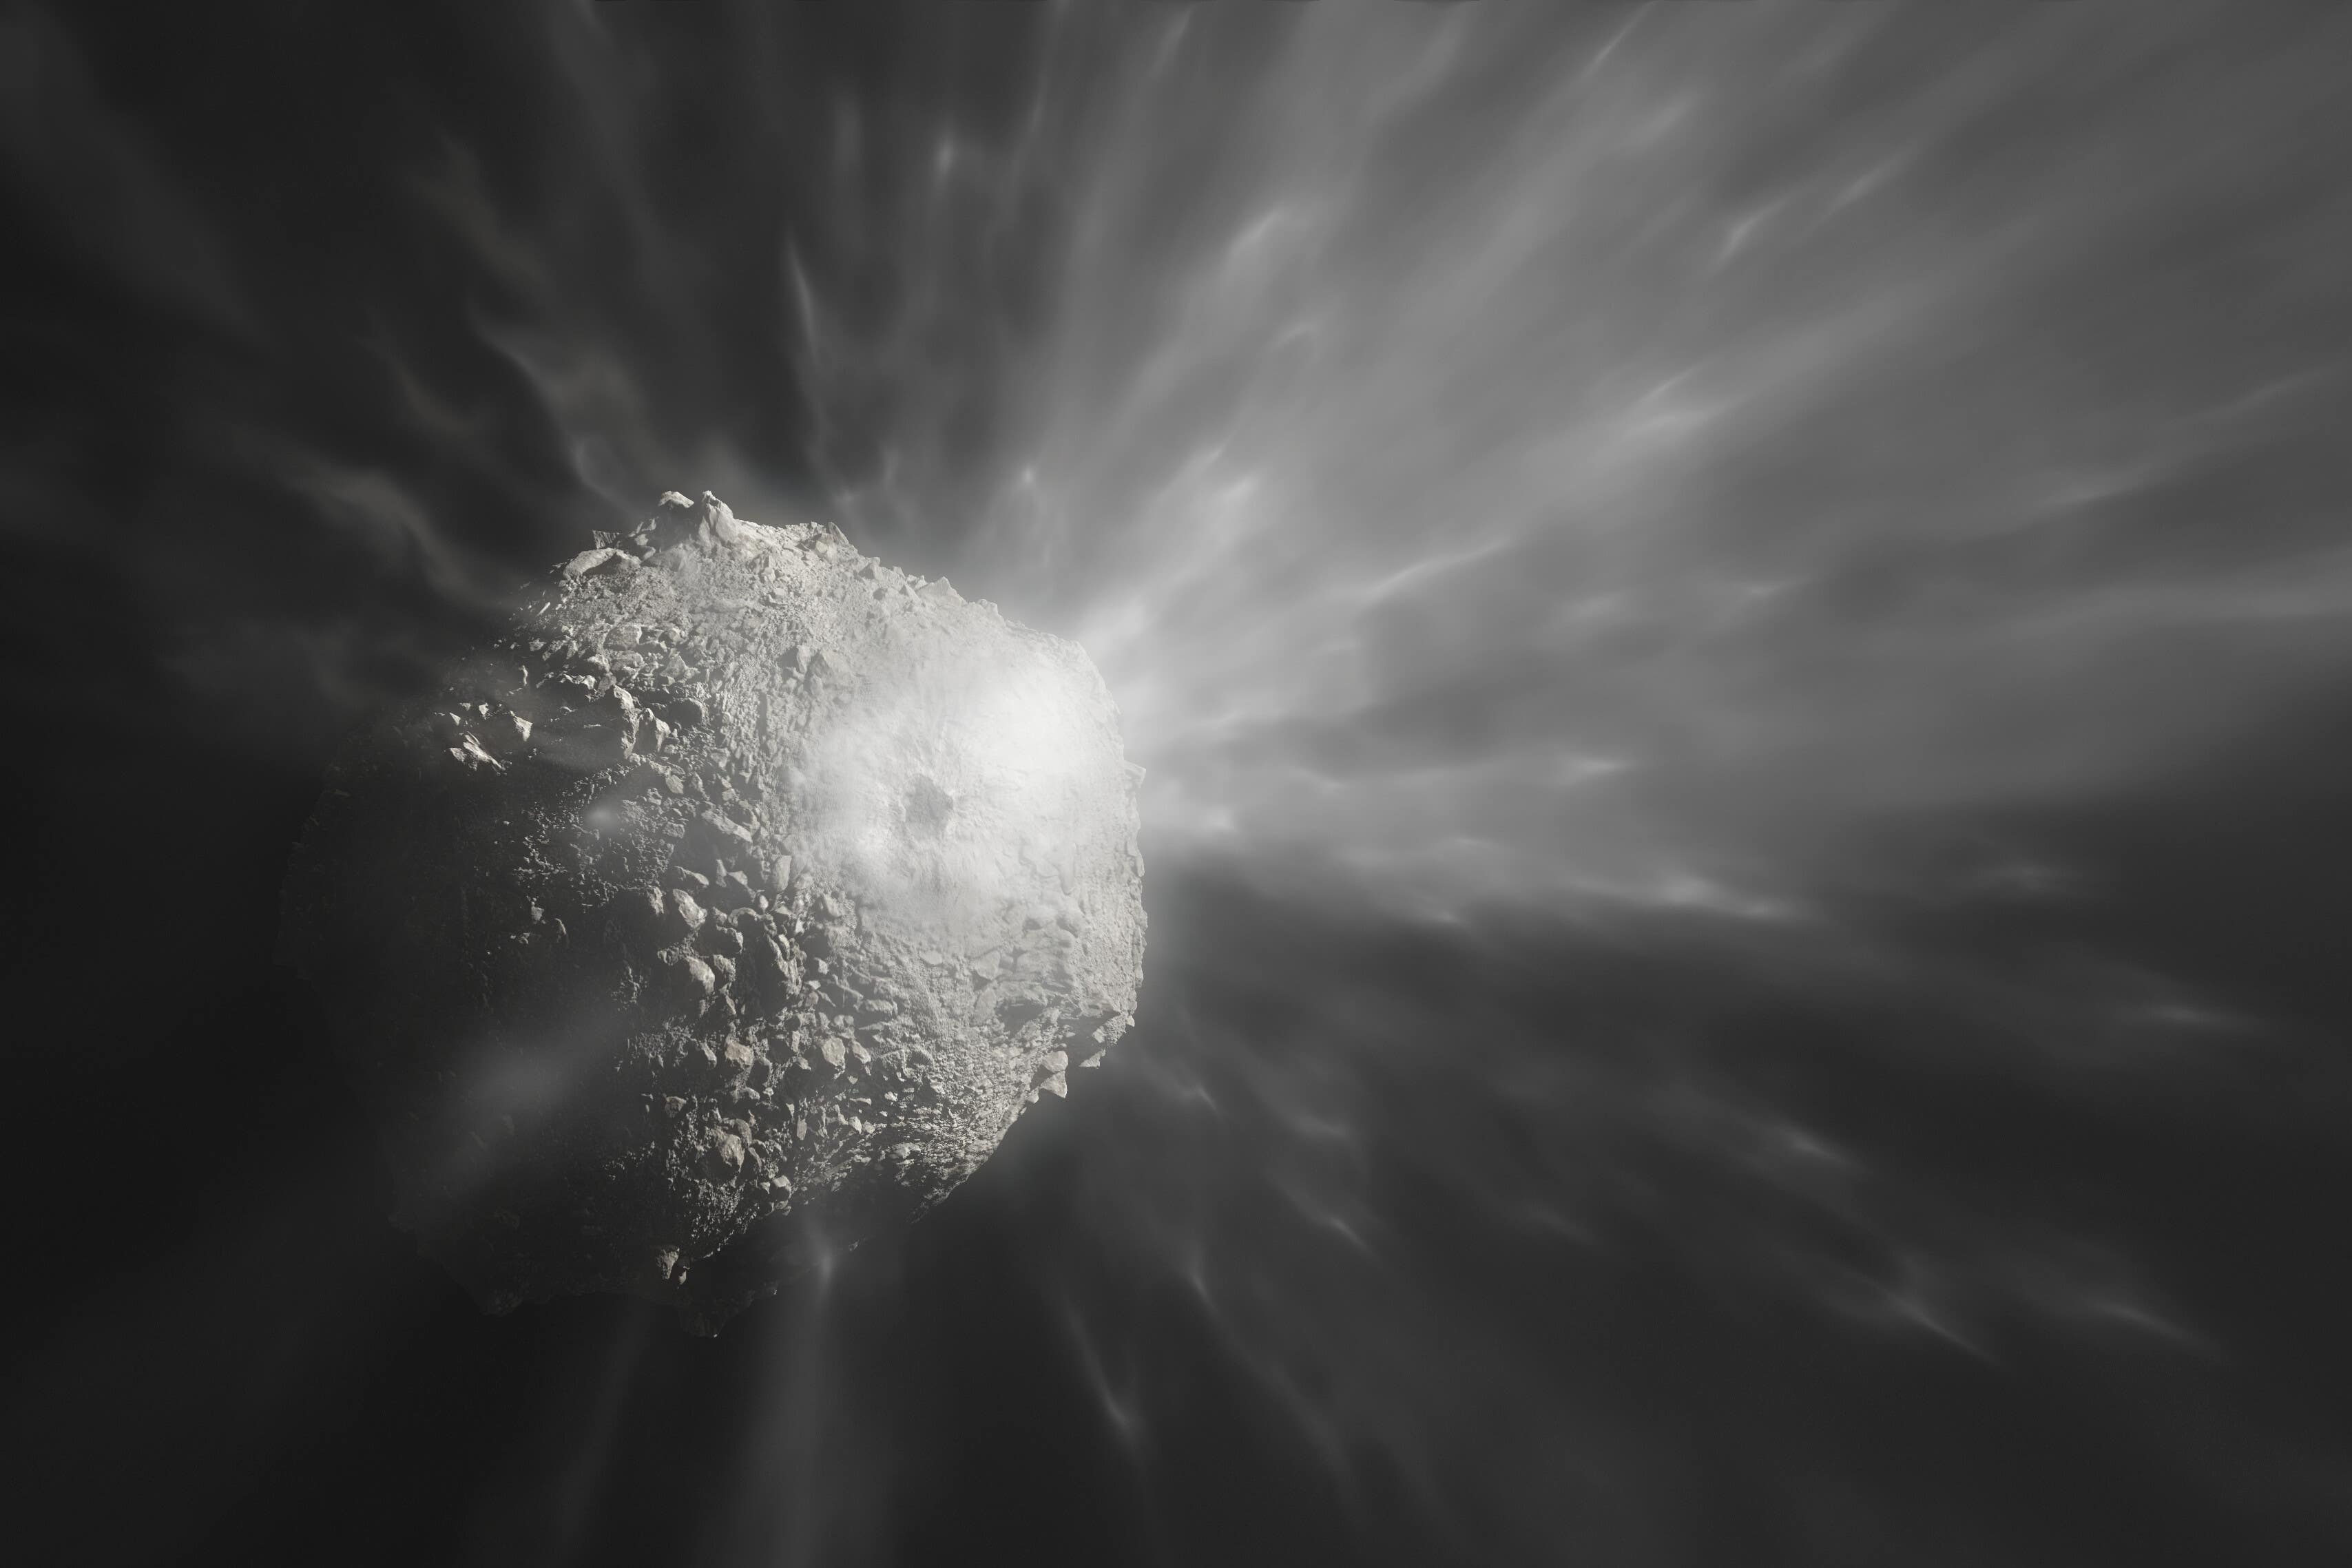 Astronomers have observed the aftermath of a Nasa mission to crash a spacecraft into an asteroid